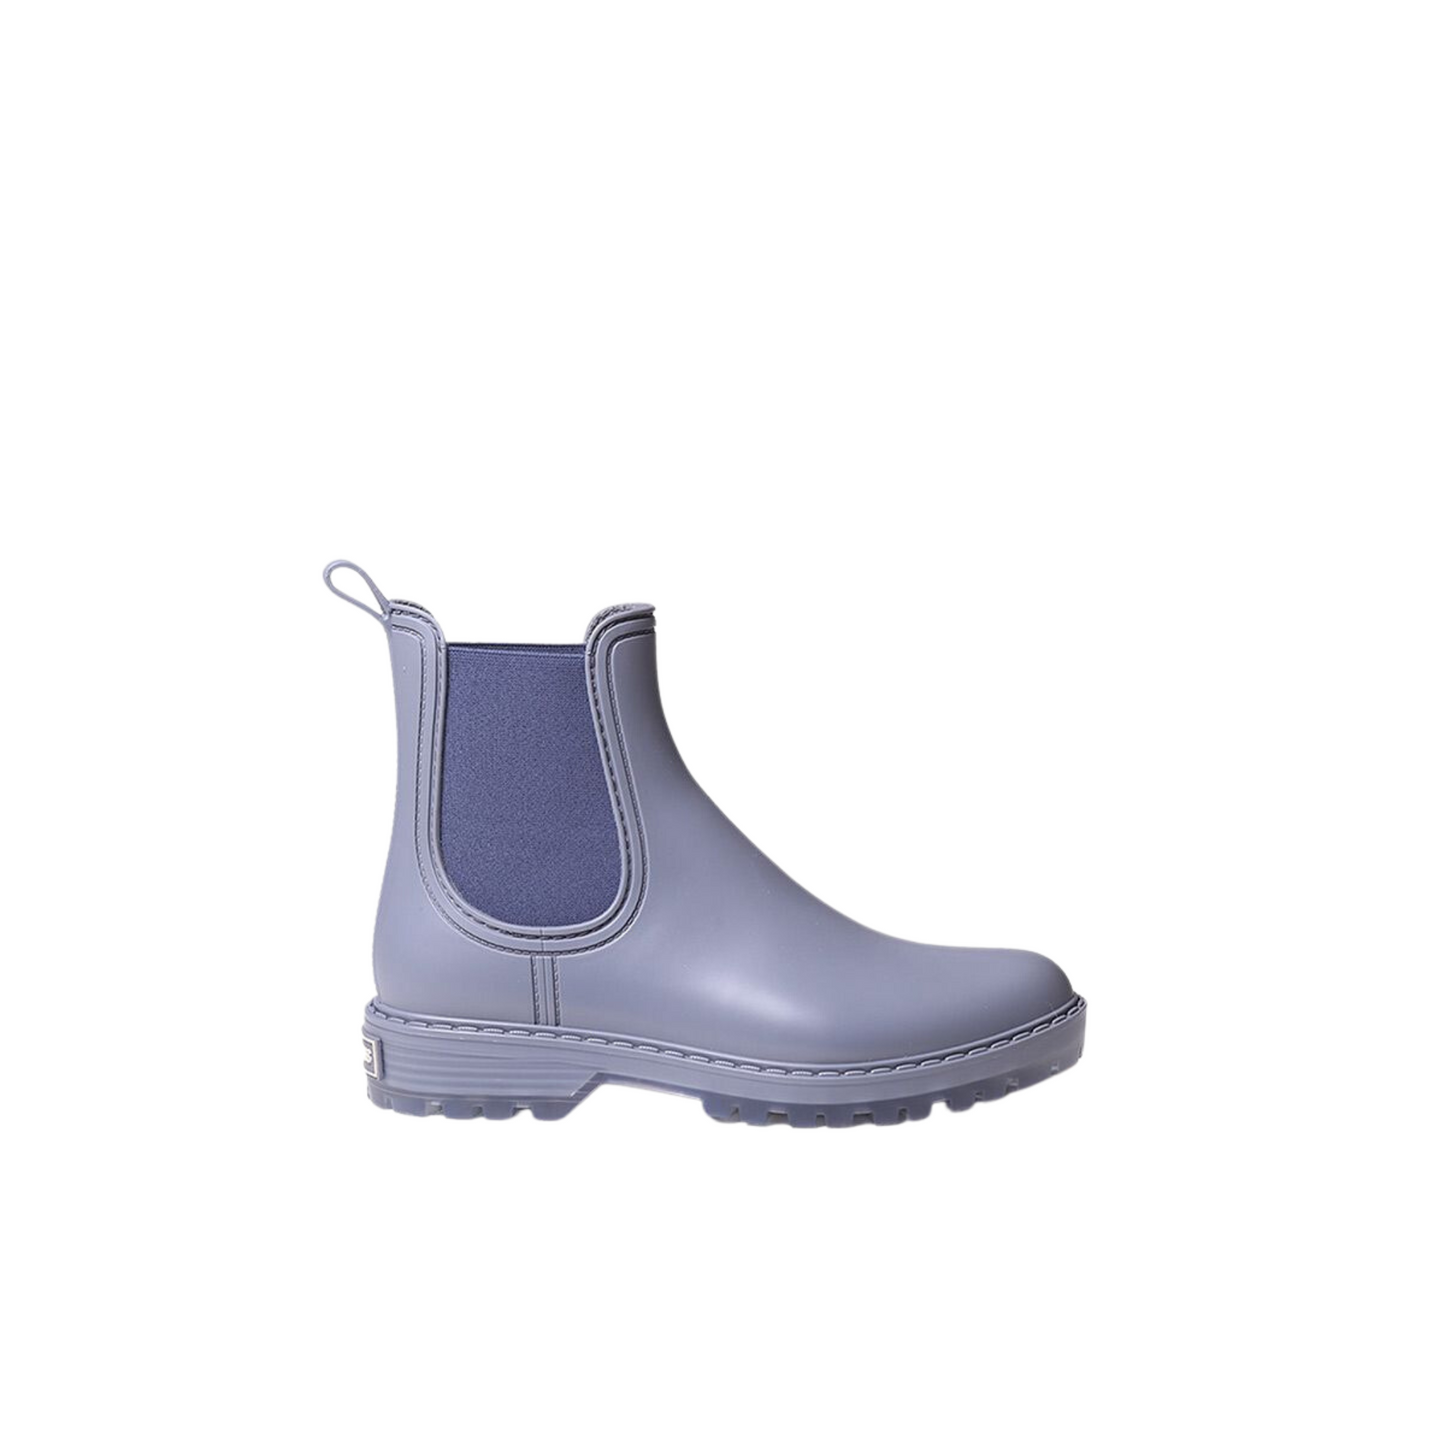 Side profile of the Toni Pons Cancun Boot in the colour Blue.